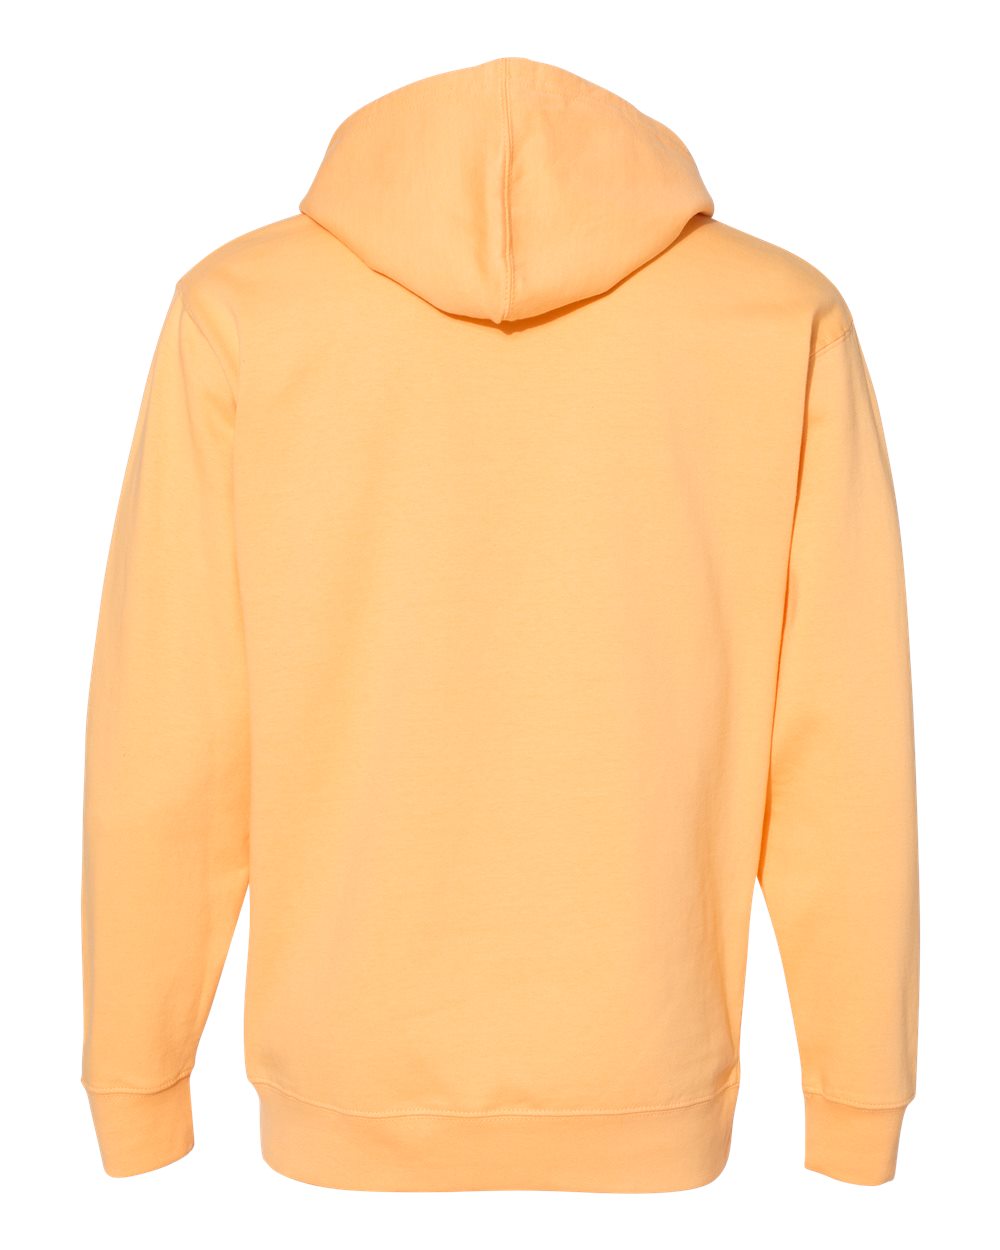 Independent Trading Co. Midweight Hooded Sweatshirt SS4500 #color_Peach